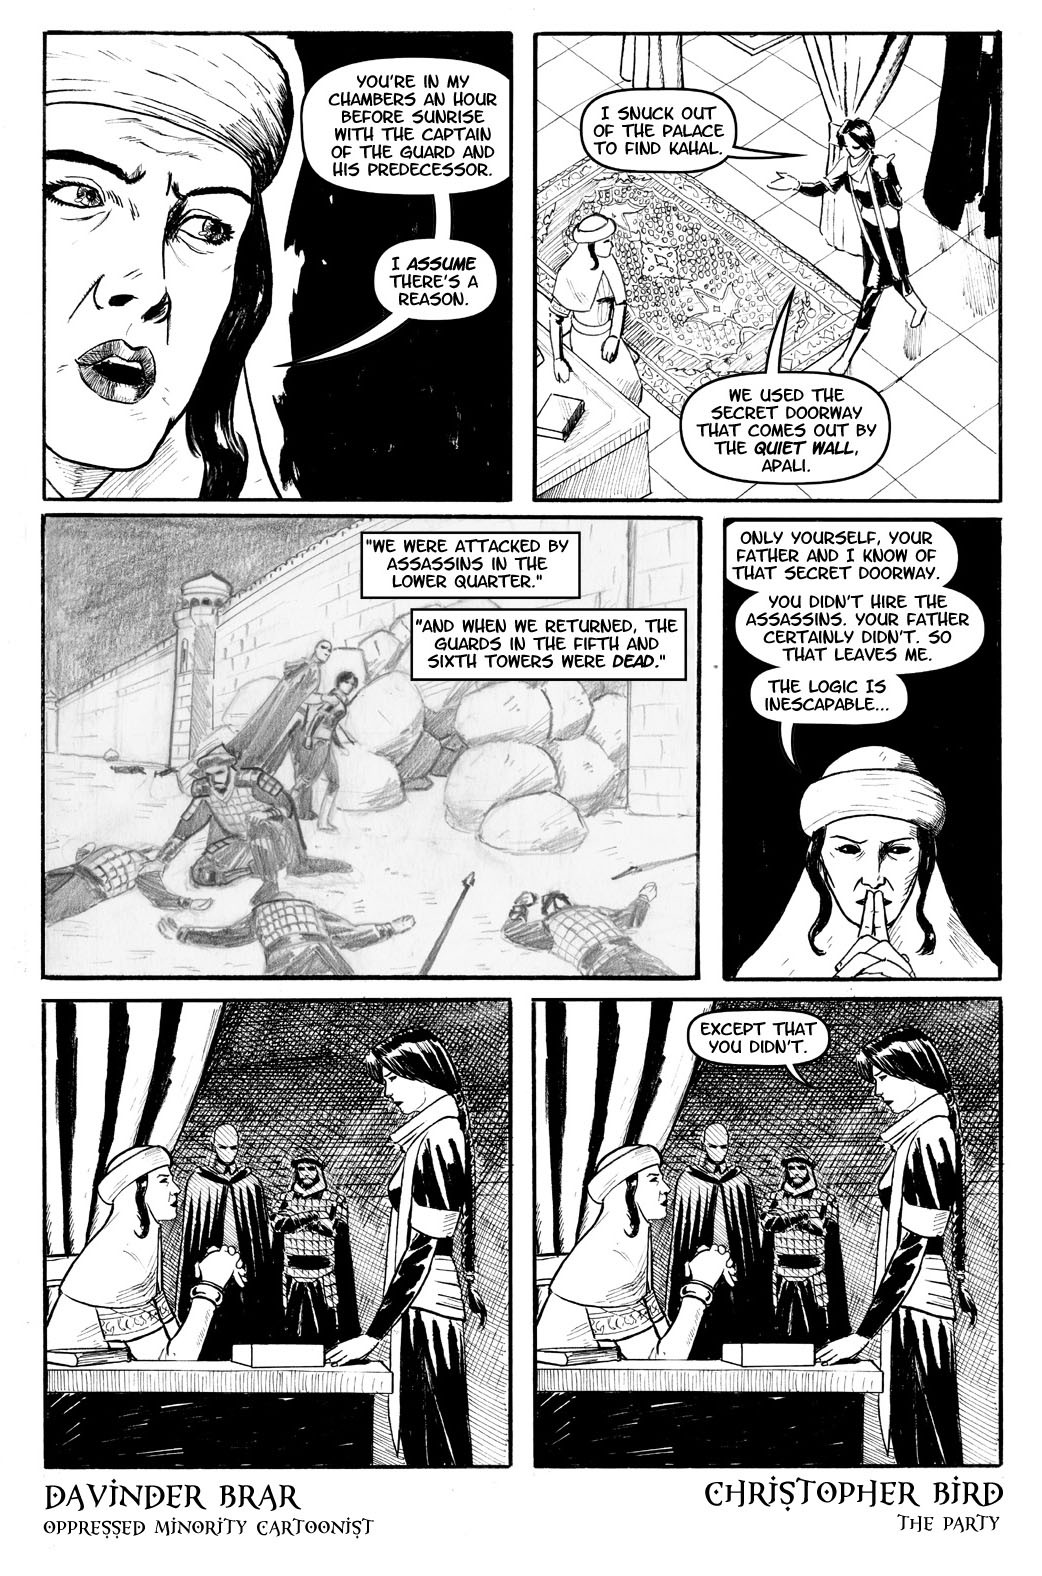 Book 5, page 6